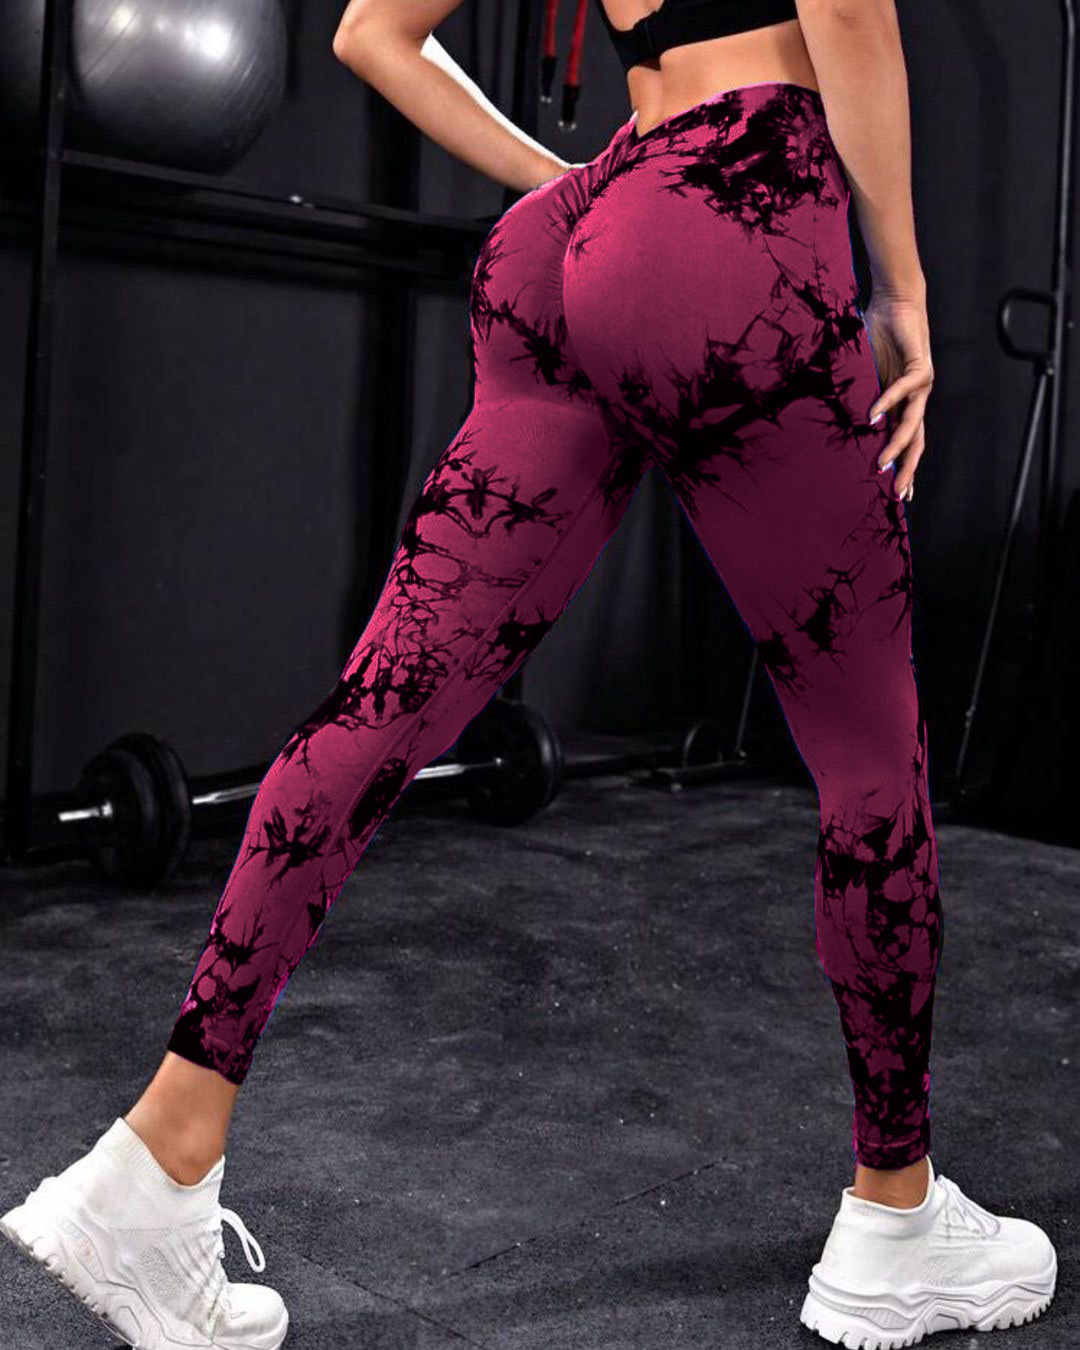 Cross-Border Seamless Peach Yoga Tight Trousers Women's Tie-Dyed Tie-Wrap Printed High Waist Hip Lift Sports Running Fitness Pants